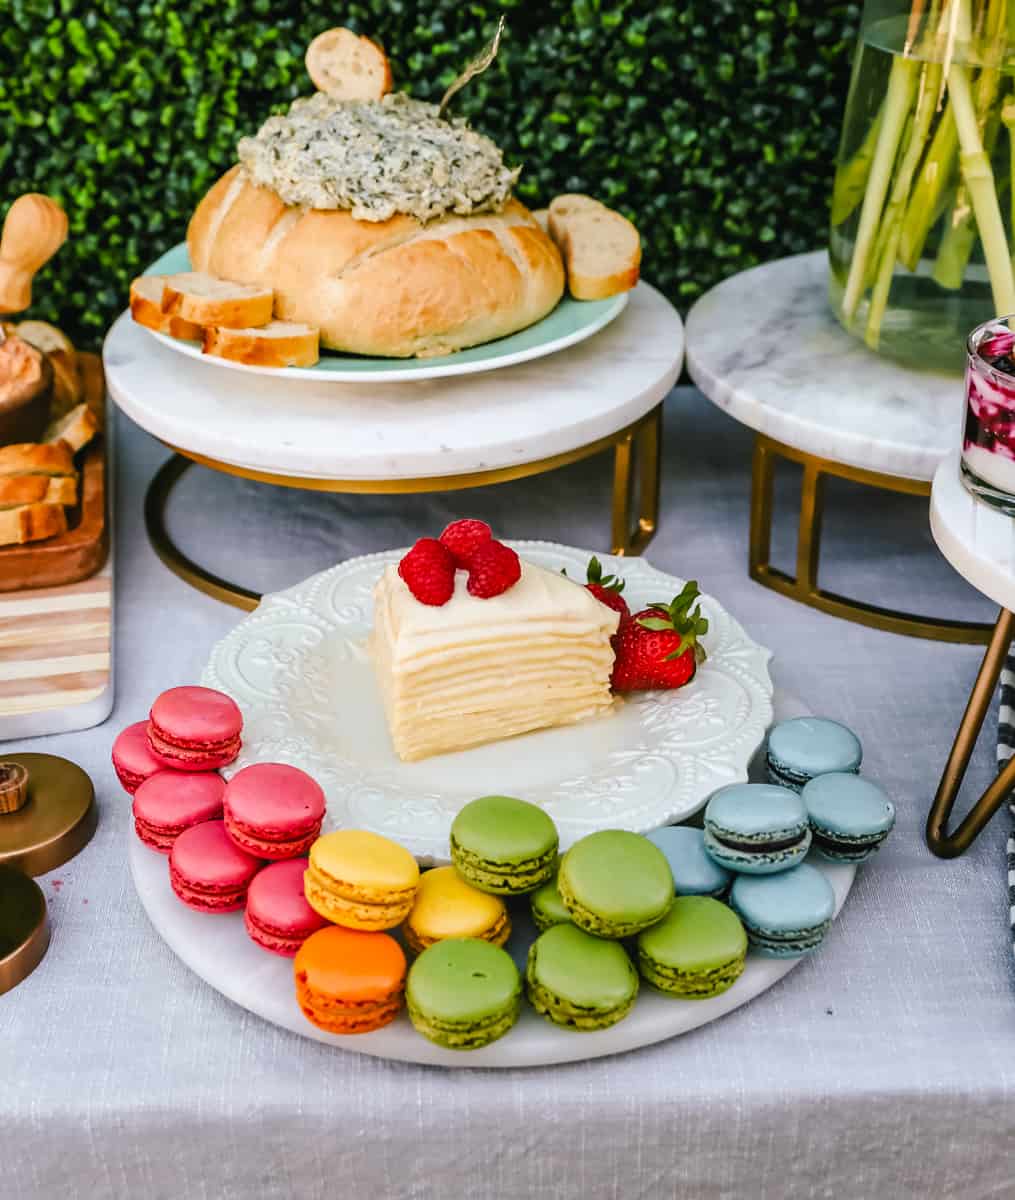 Macarons. How to create the Ultimate Spring Brunch or Spring Party with an assortment of both sweet and savory breakfast items and beautiful desserts. 30+ Spring and Easter Party Food Ideas. How to decorate for a Spring Brunch and Party too.